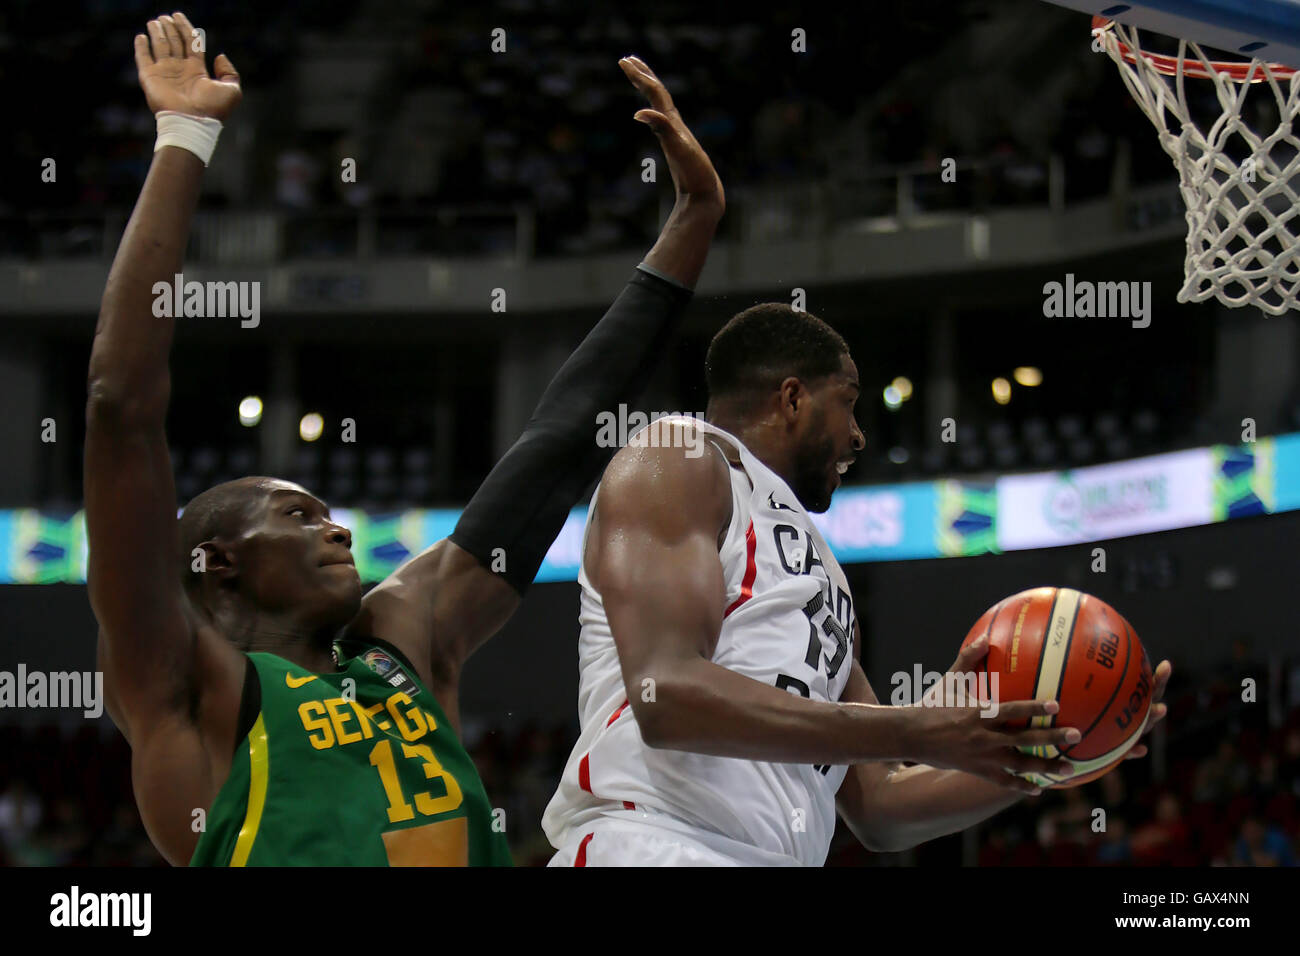 Pasay City, Philippines. 6th July, 2016. Tristan Thompson (R) of Canada competes against Hamady Ndiaye of Senegal during their FIBA Olympic Qualifying Tournament in Pasay City, the Philippines, July 6, 2016. Canada won 58-55. © Rouelle Umali/Xinhua/Alamy Live News Stock Photo